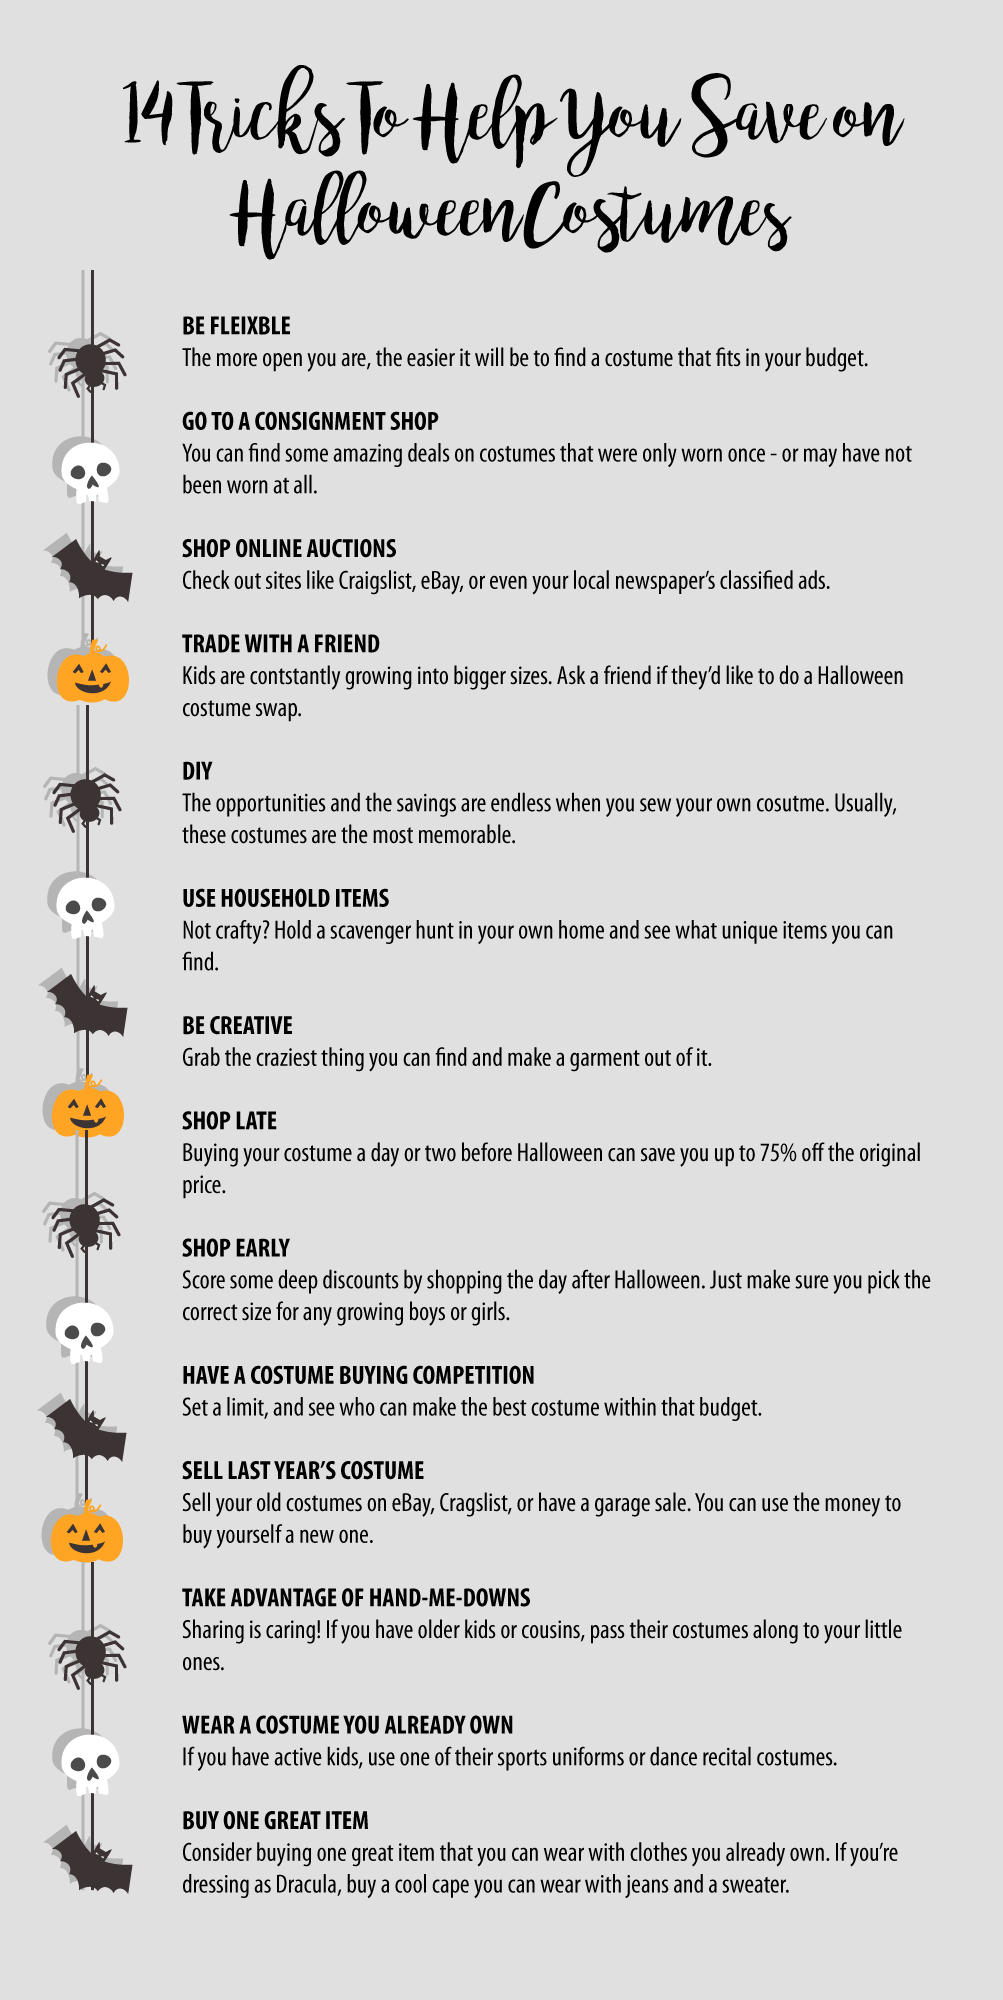 Infographic with tips on how to save on Halloween costumes